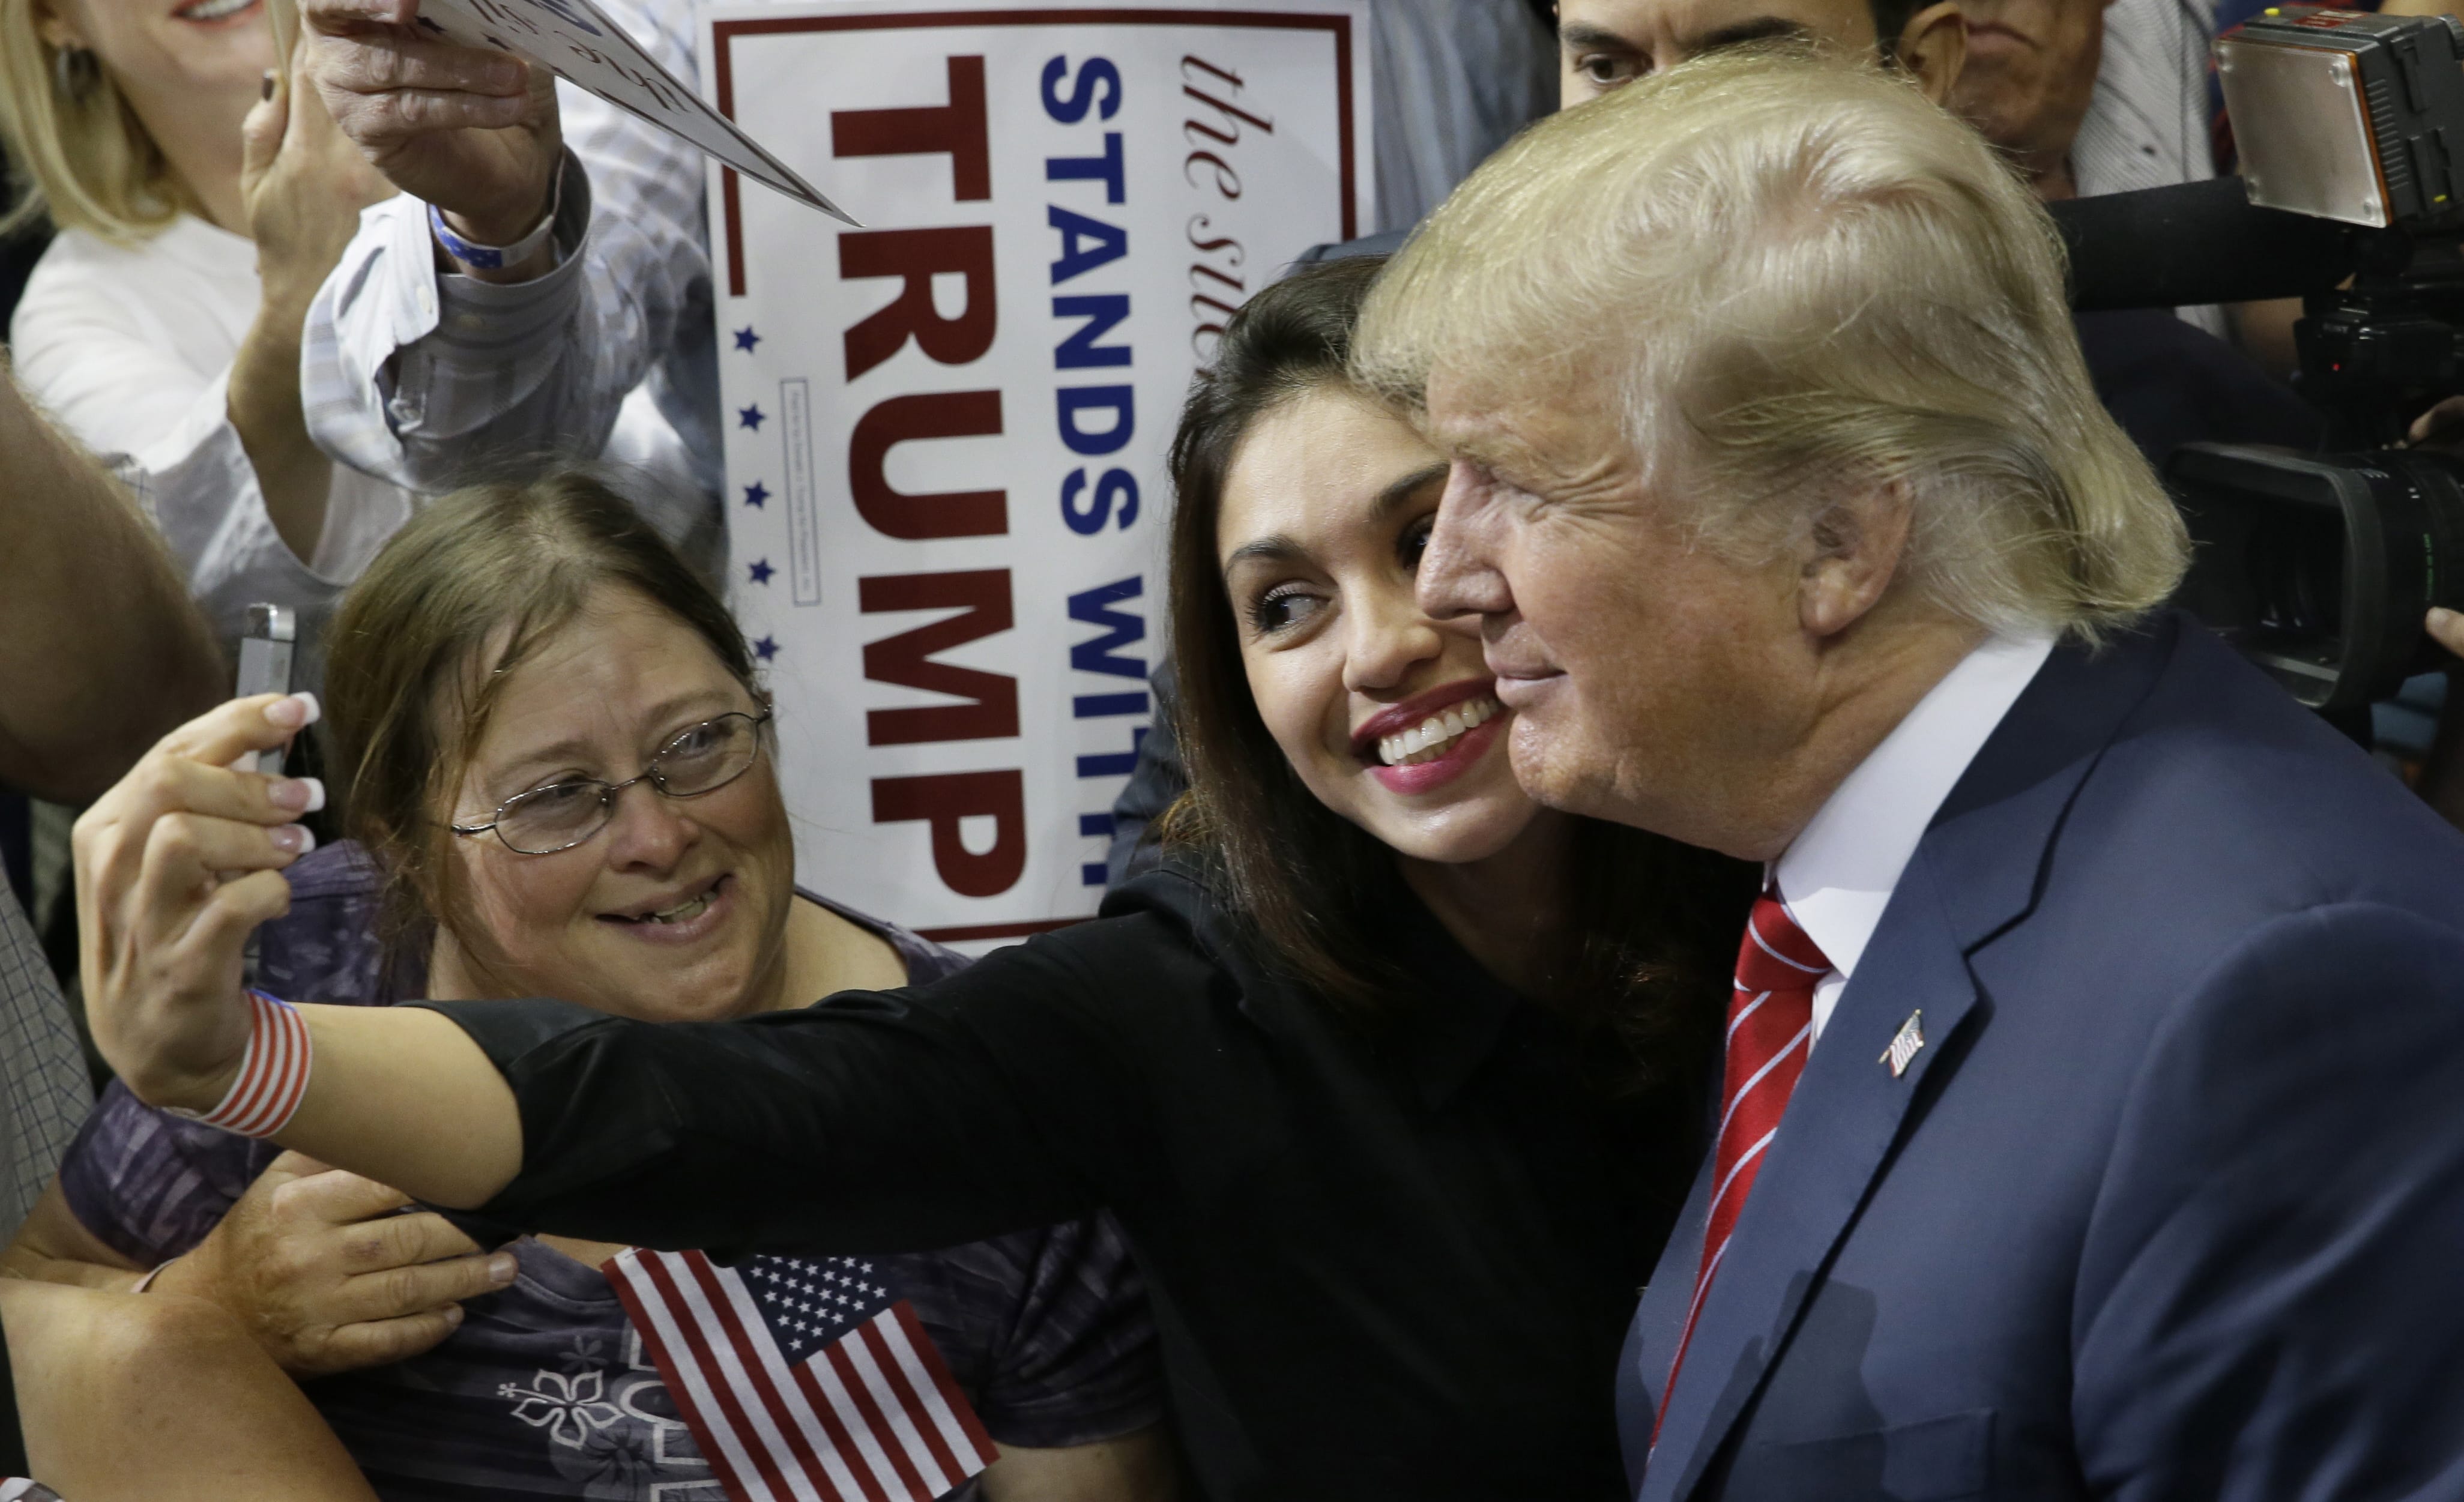 Republican presidential candidate Donald Trump takes a photo with a supporter after speaking at a campaign event in Dallas on Monday.